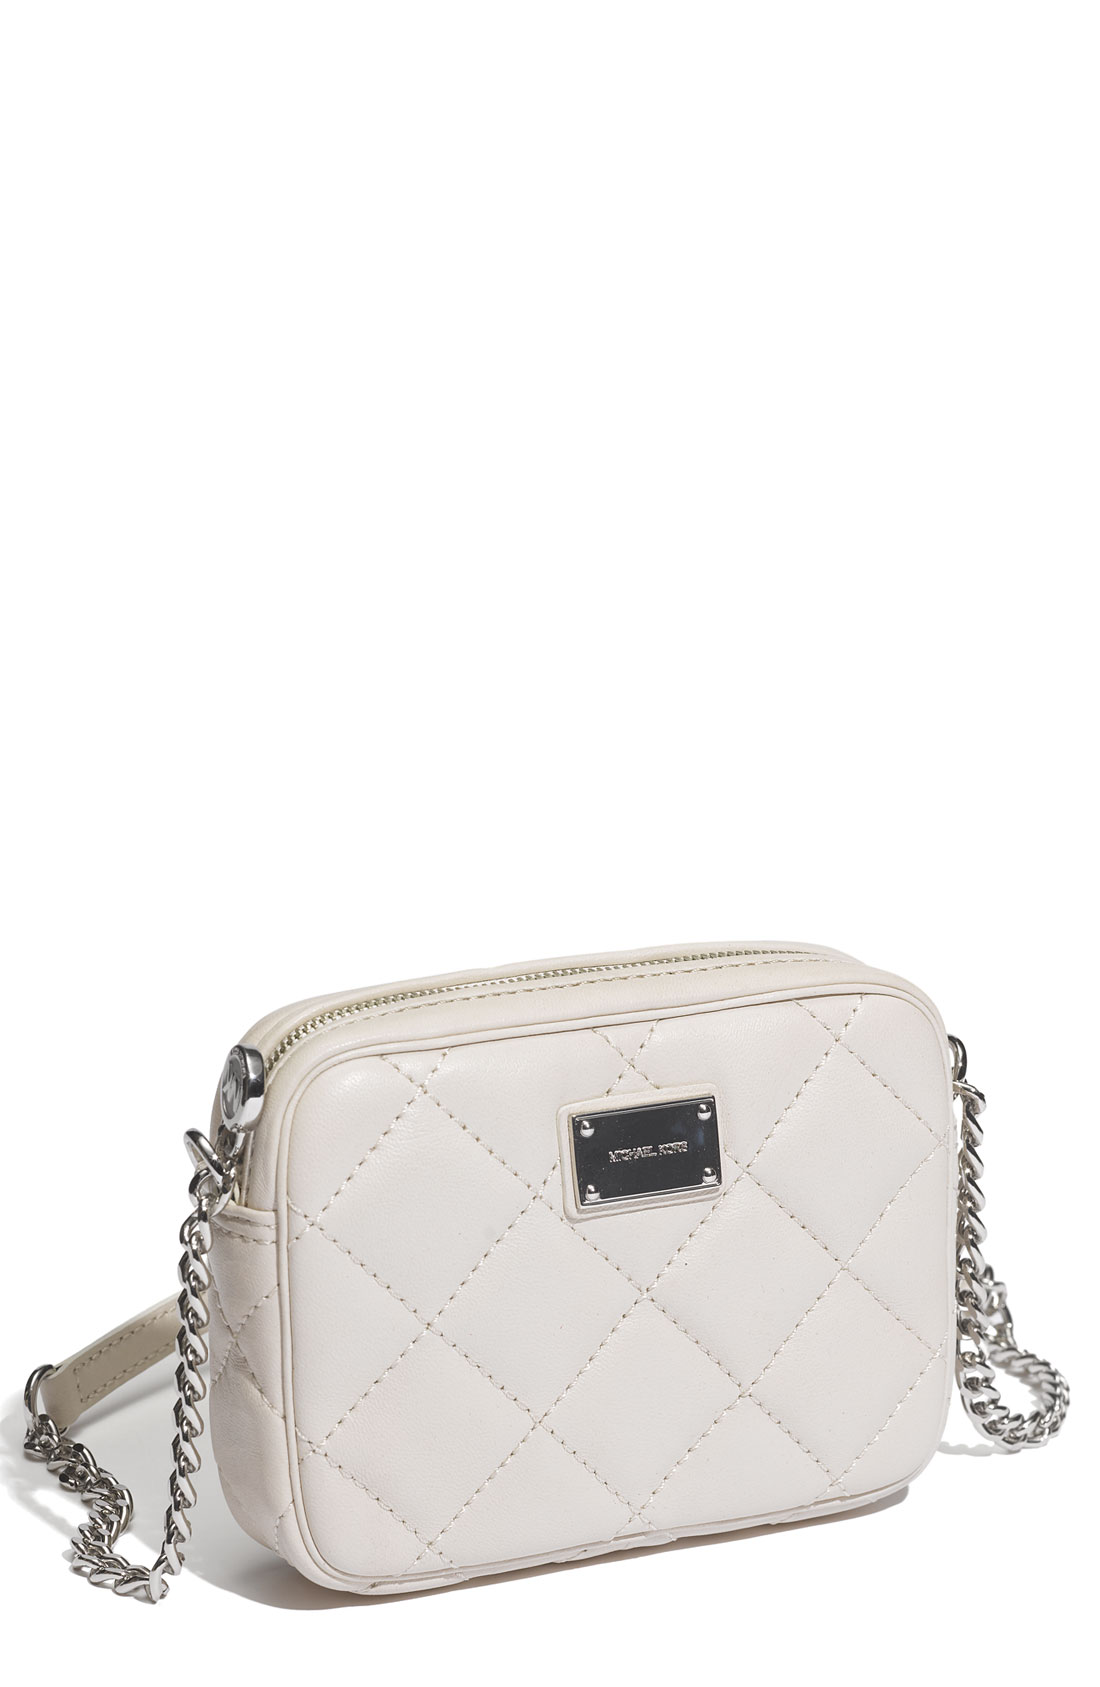 Michael Michael Kors Hamilton Quilted Leather Crossbody Bag in White (vanilla) Lyst